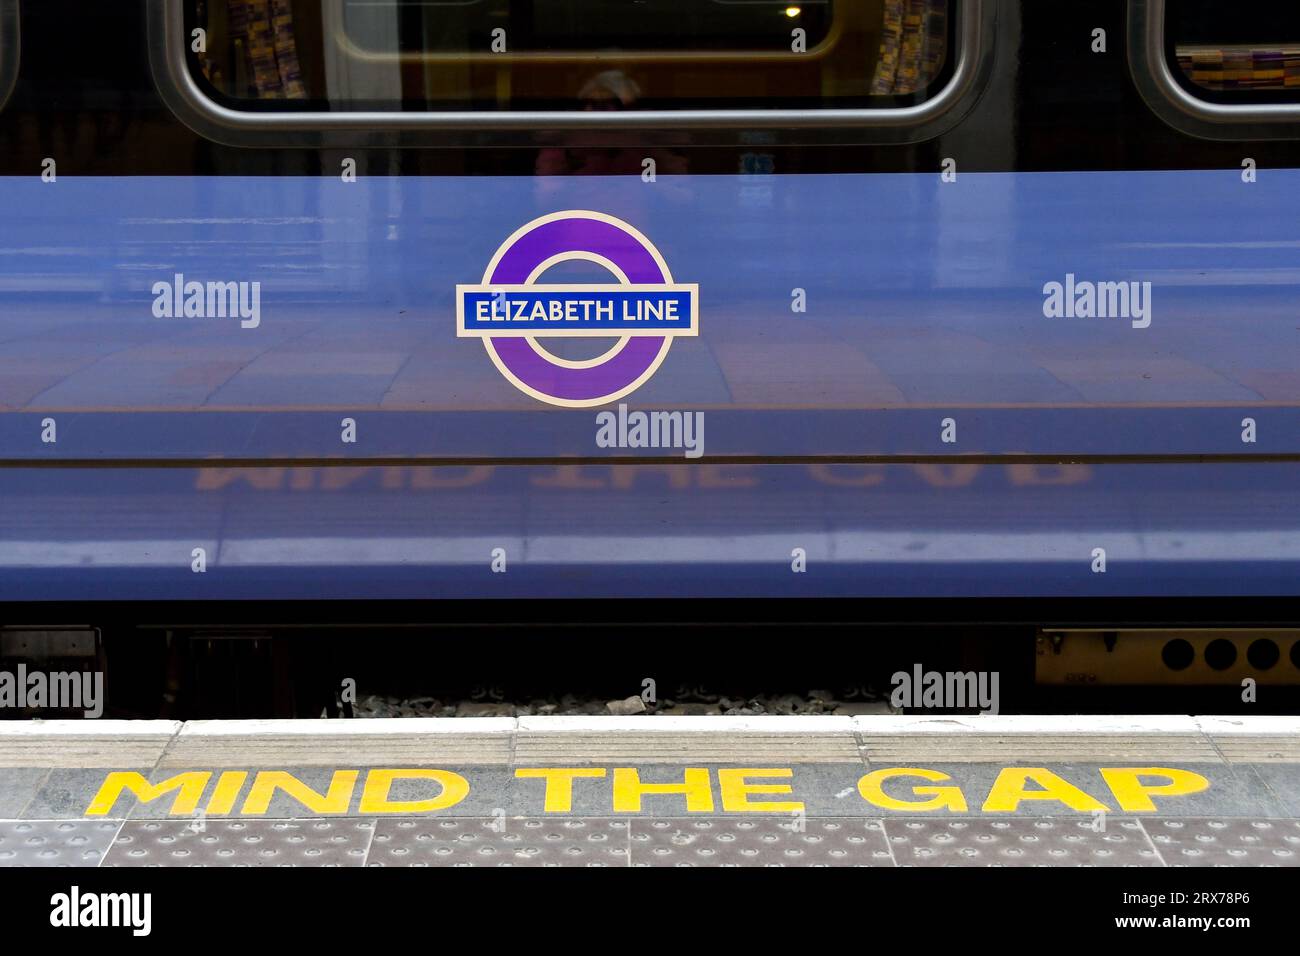 London, England, UK - 27 June 2023: Close up view of the side of a train on the Elizabeth Line at London Paddington railway station and a Mind the Gap Stock Photo